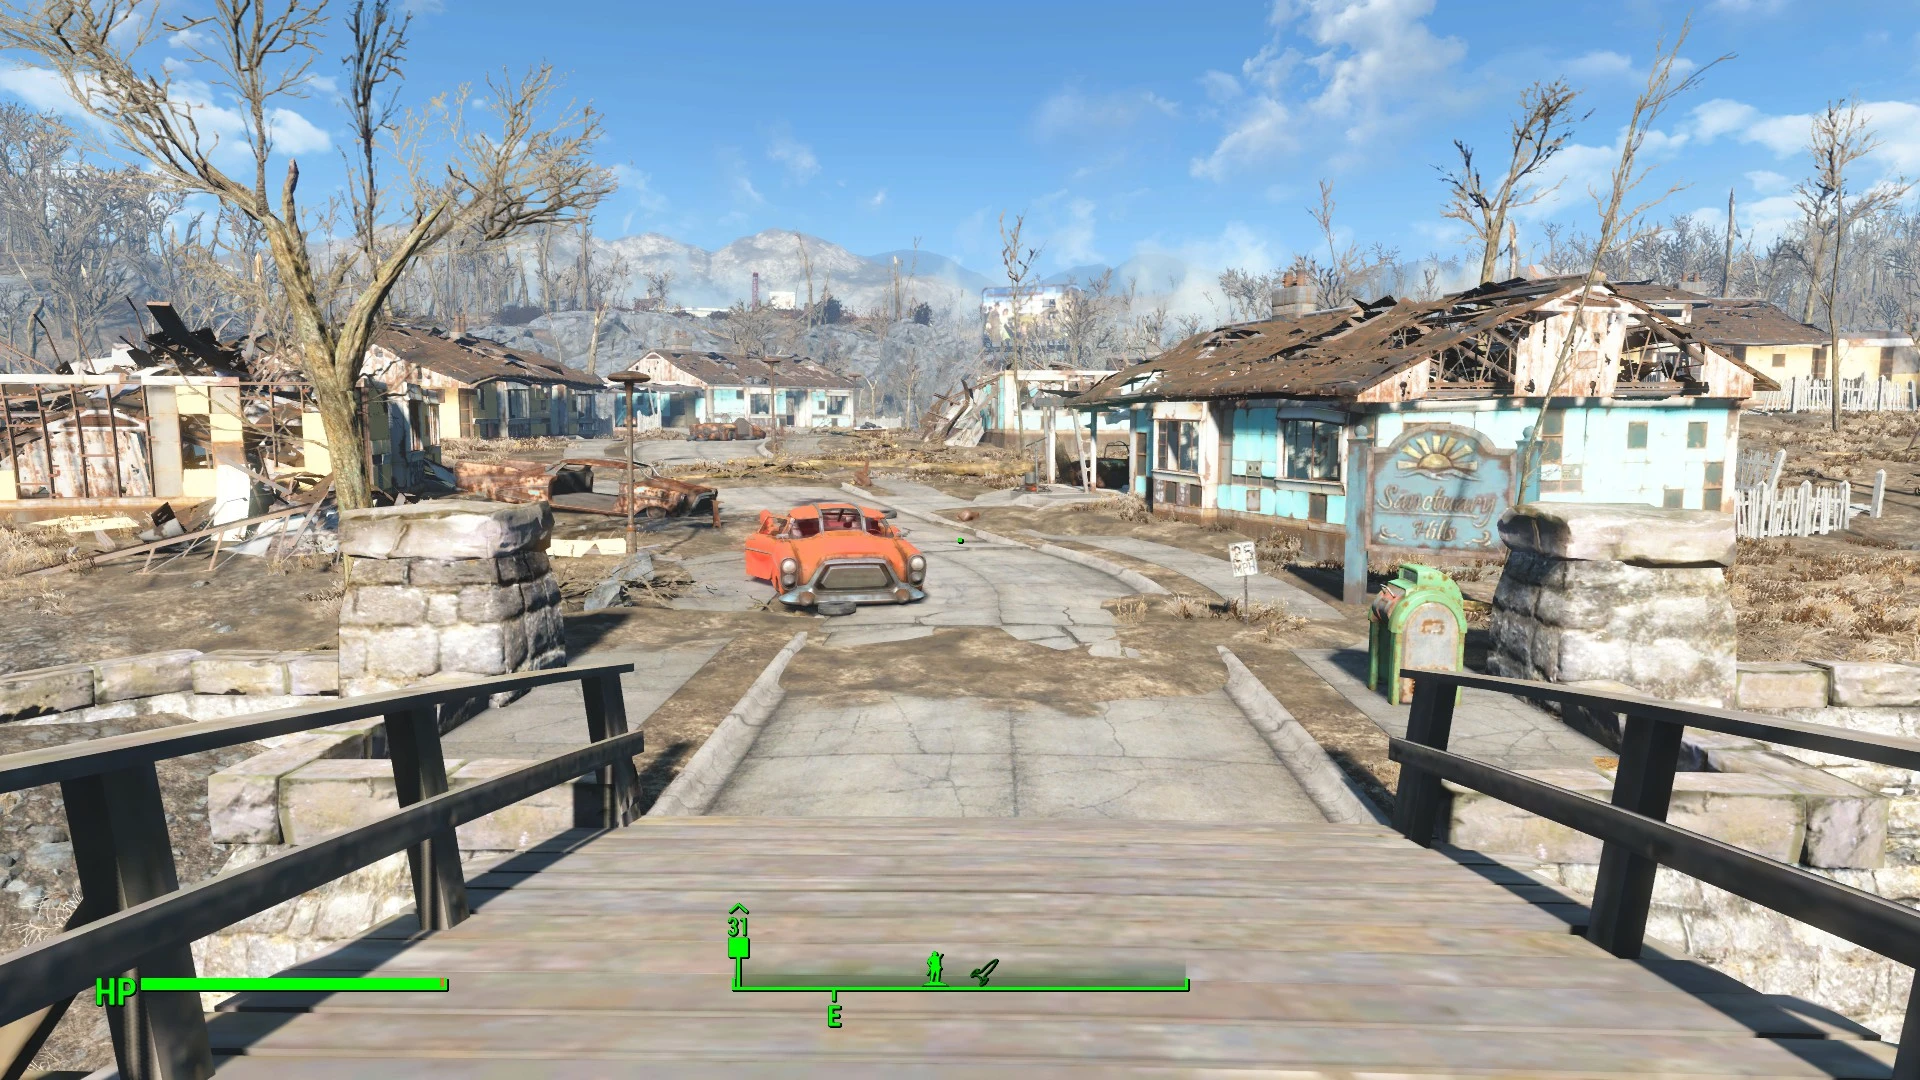 fallout 4 mod spring cleaning